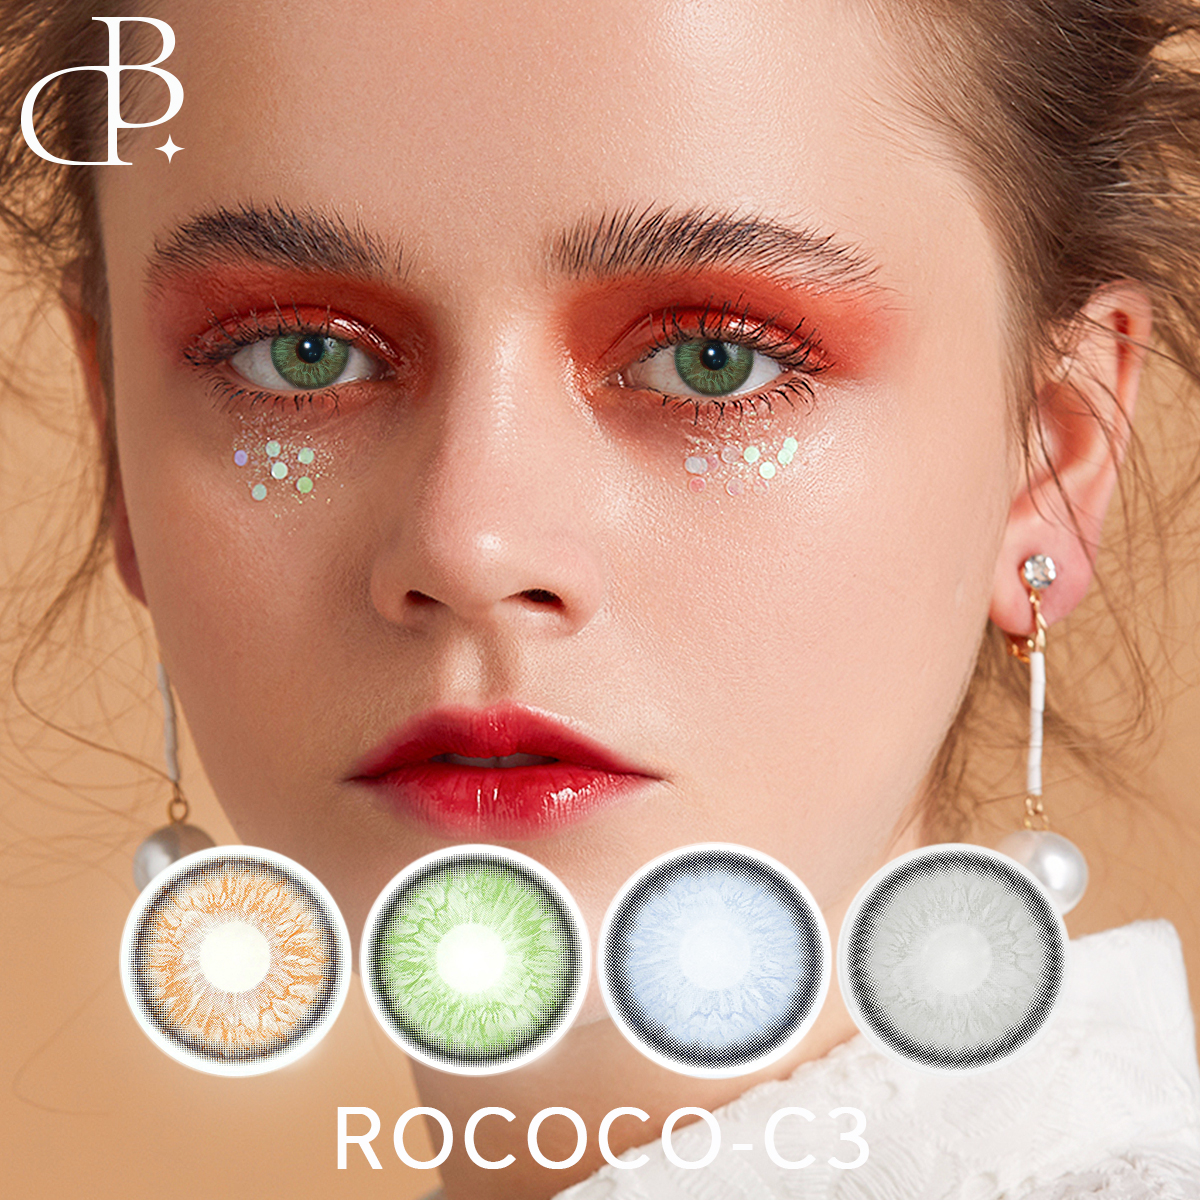 ROCOCO-3 series 1 year factory color lens degree cosmetic colored eye contact lenses with box